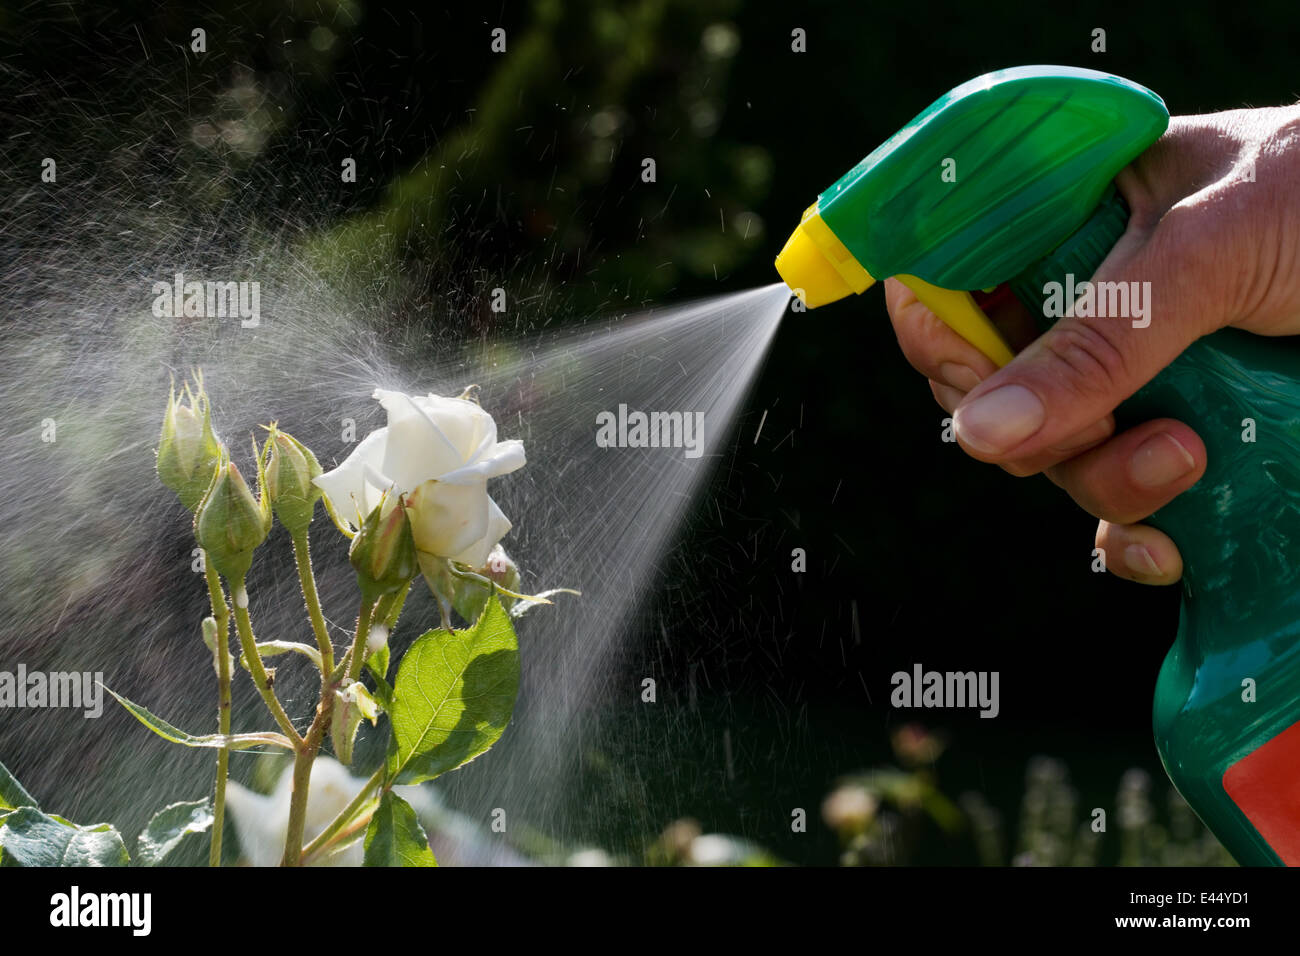 Roses in a garden are sprayed with a pesticide. Stock Photo